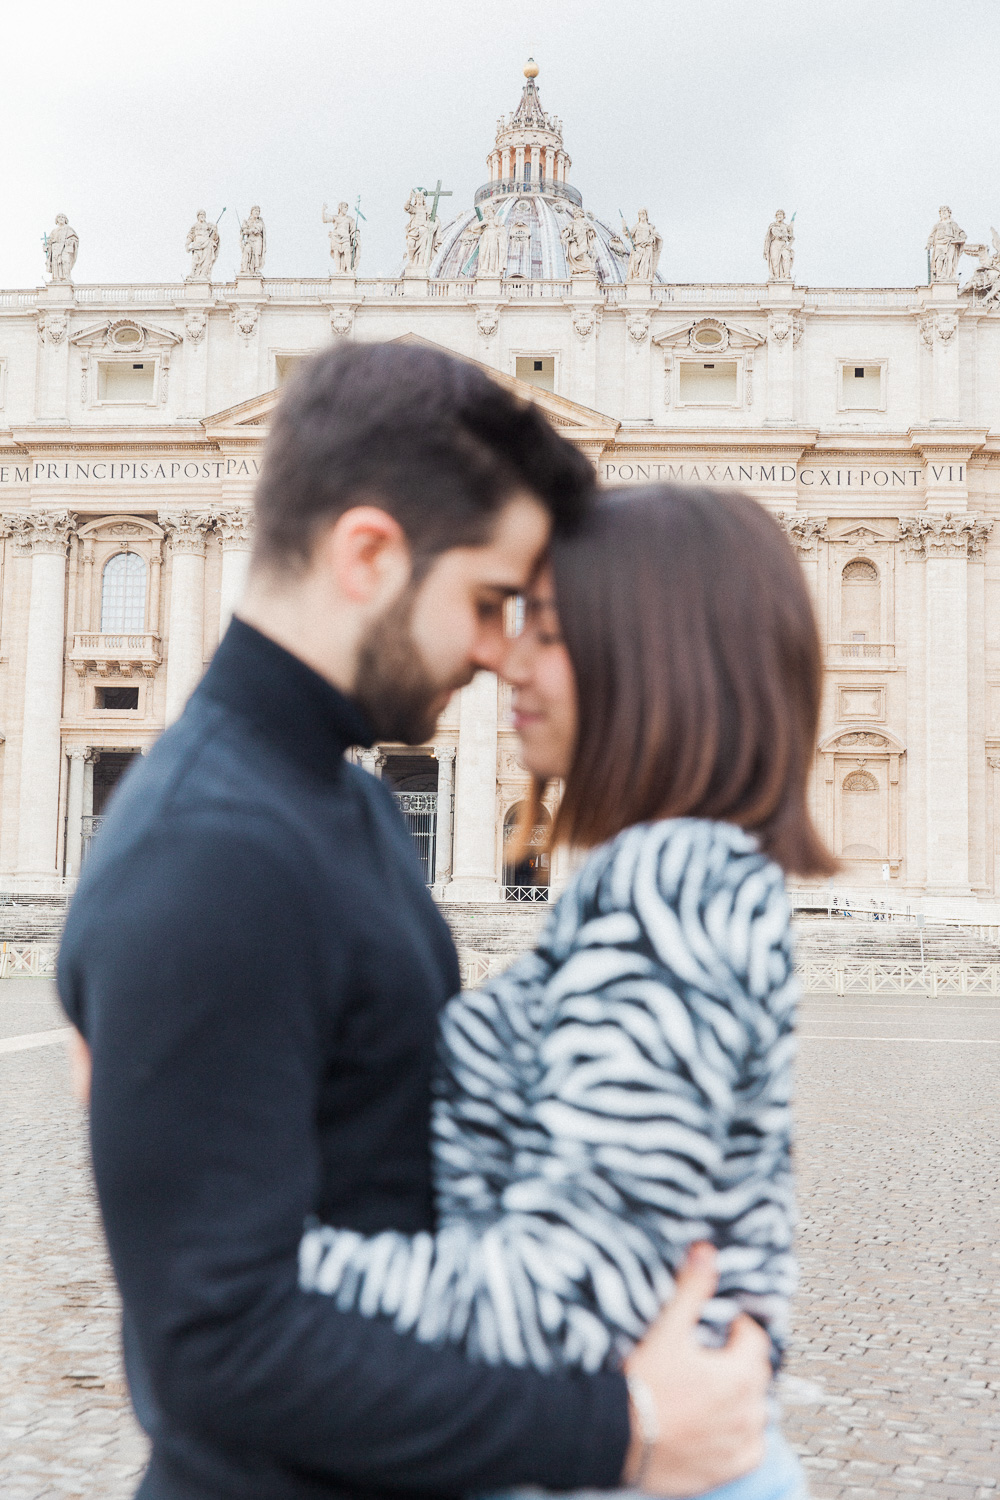 Couple hugging in front of Sait Peter's Basilica in Rome, Italy